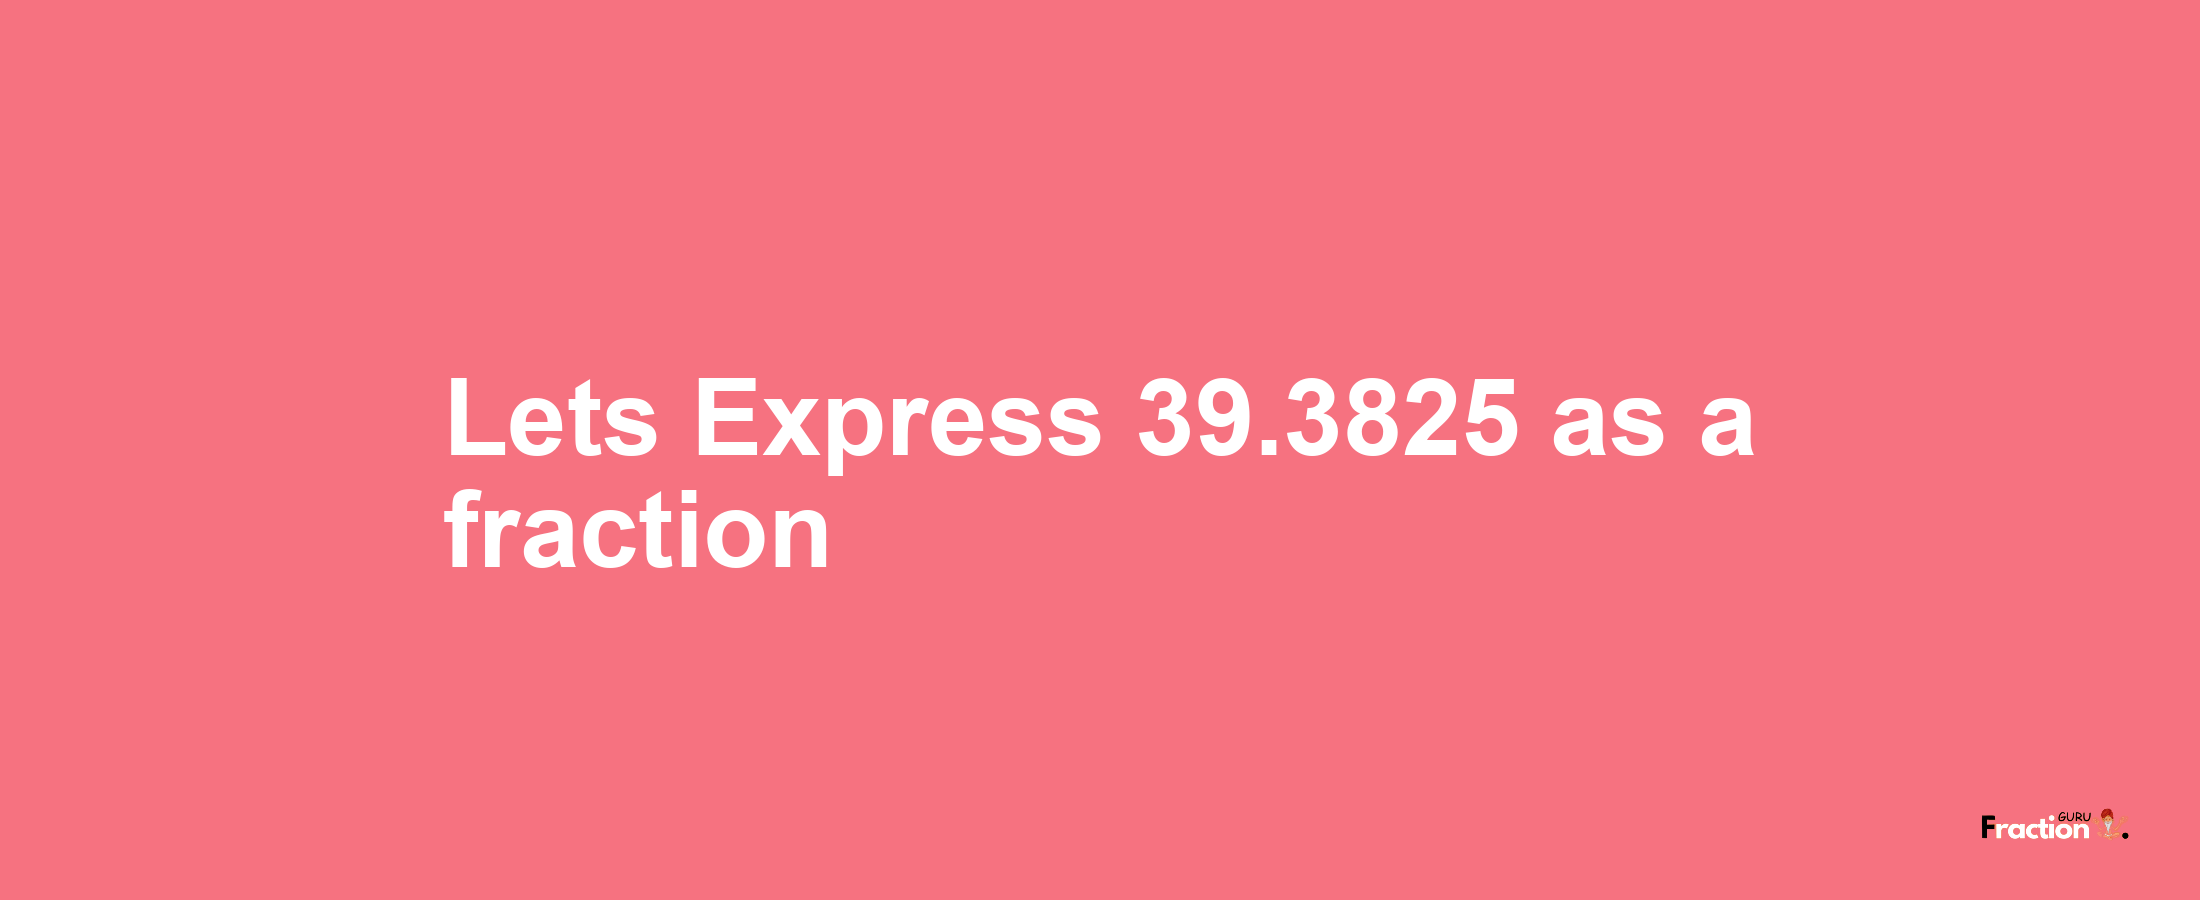 Lets Express 39.3825 as afraction